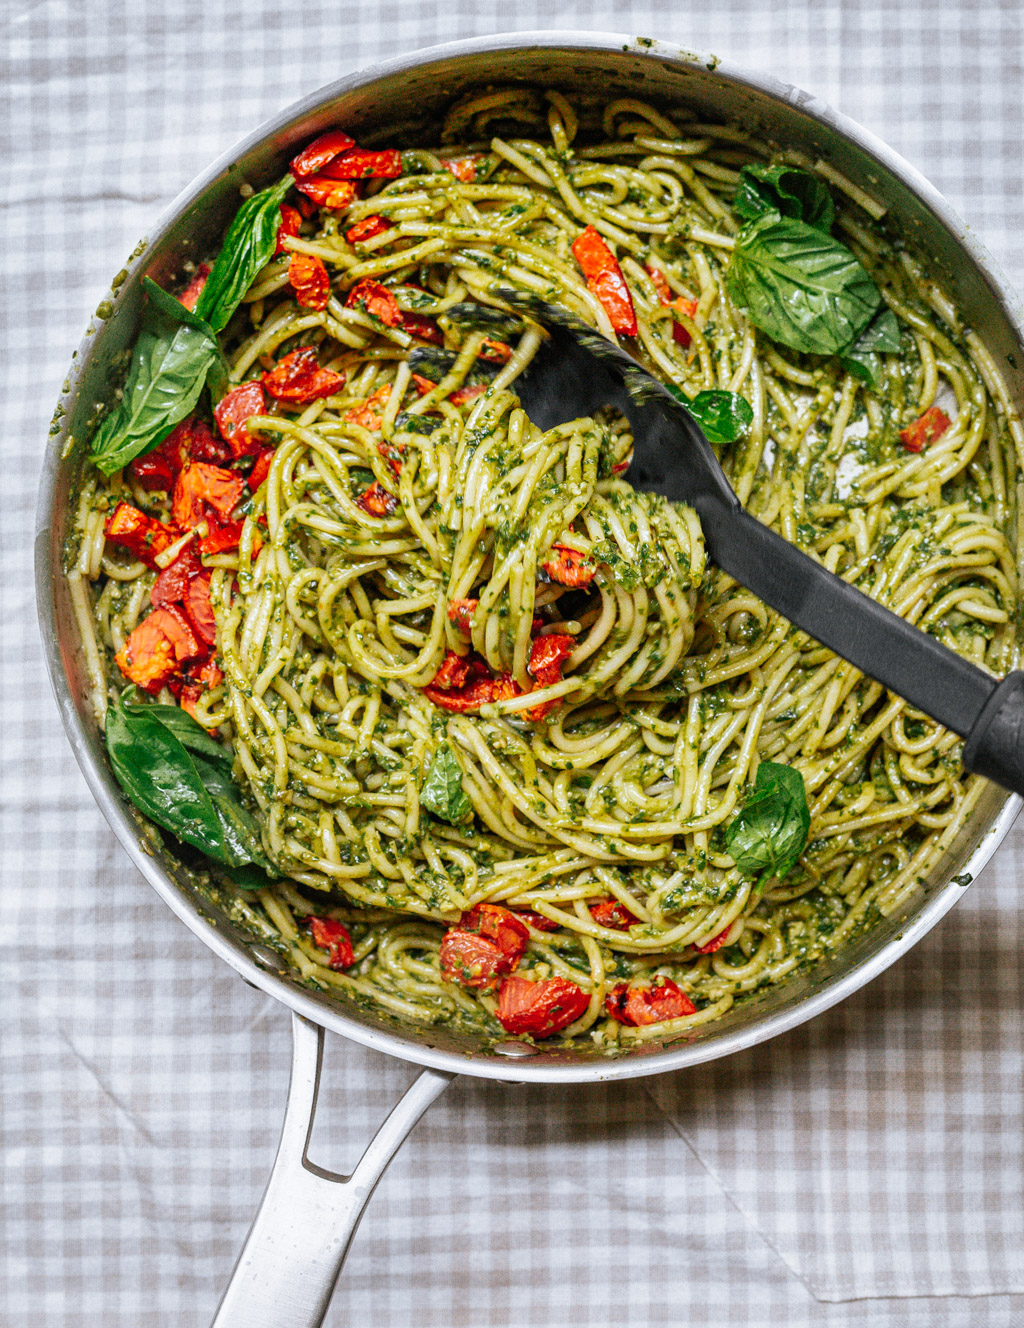 PASTA WITH SPINACH & CHILLI PESTO + QUICK ROASTED TOMATOES - The Blurry